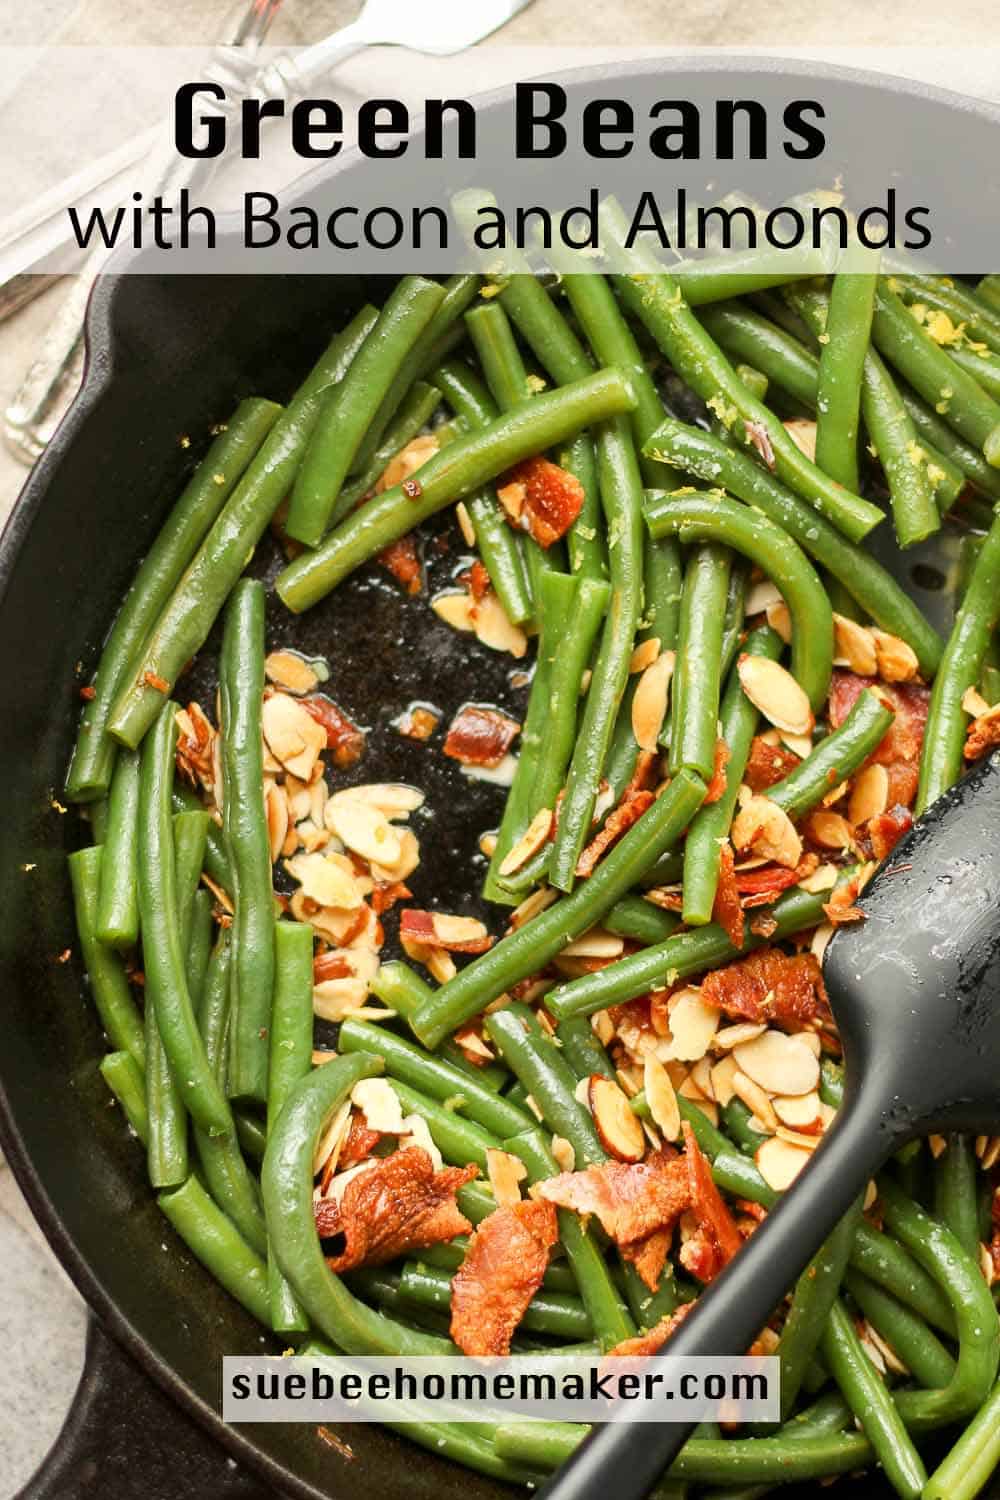 A skillet of green beans with bacon and almonds.